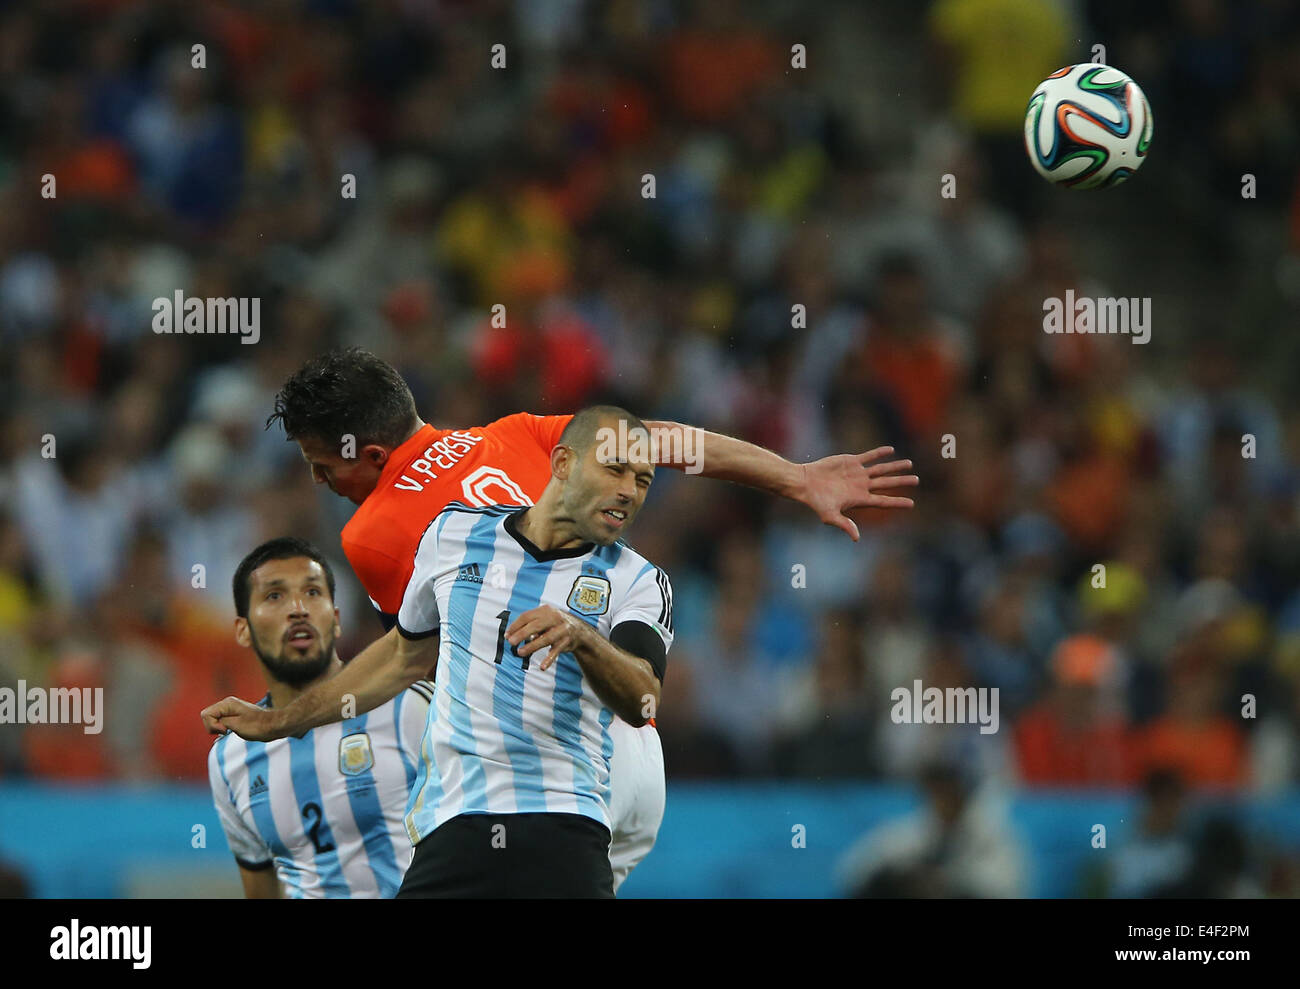 Sao Paulo, Brazil. 9th July, 2014. Netherlands' Robin van Persie (C) competes for a header with Argentina's Ezequiel Garay (L) and Javier Mascherano (R) during a semifinal match between Netherlands and Argentina of 2014 FIFA World Cup at the Arena de Sao Paulo Stadium in Sao Paulo, Brazil, on July 9, 2014. Credit:  Xu Zijian/Xinhua/Alamy Live News Stock Photo